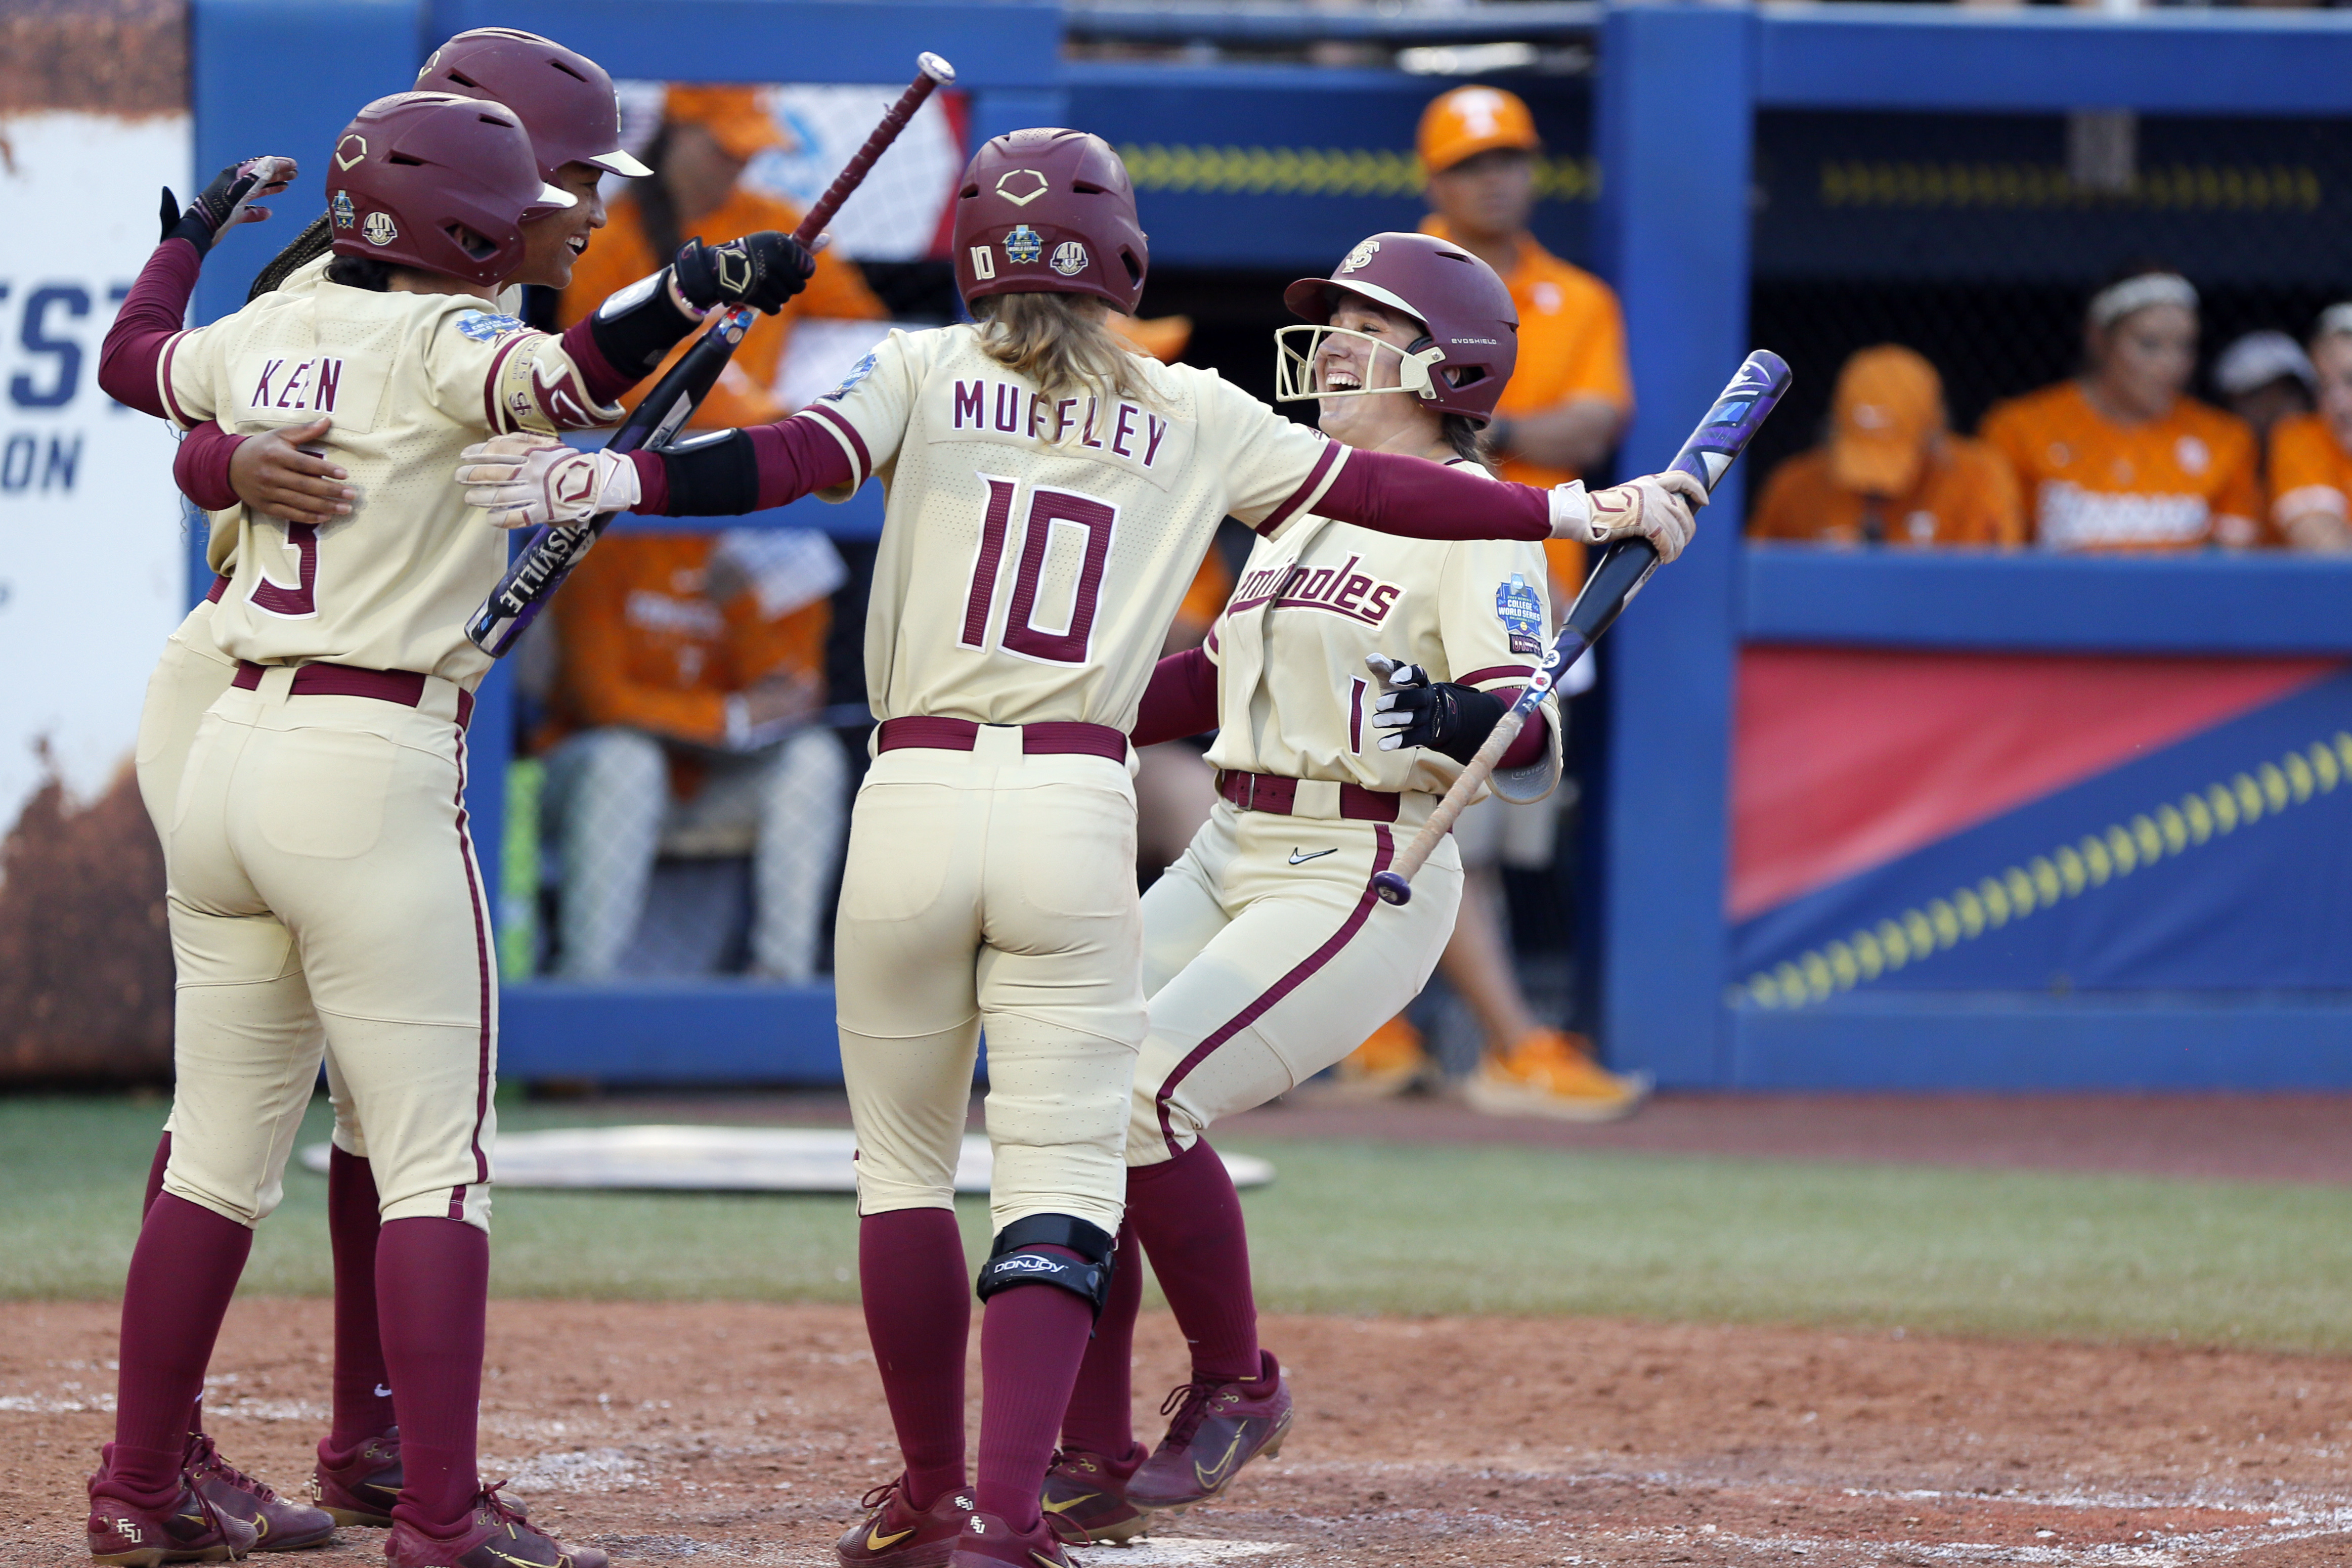 Oklahoma-Florida State live stream (6/7) How to watch Womens College World Series online, TV, time